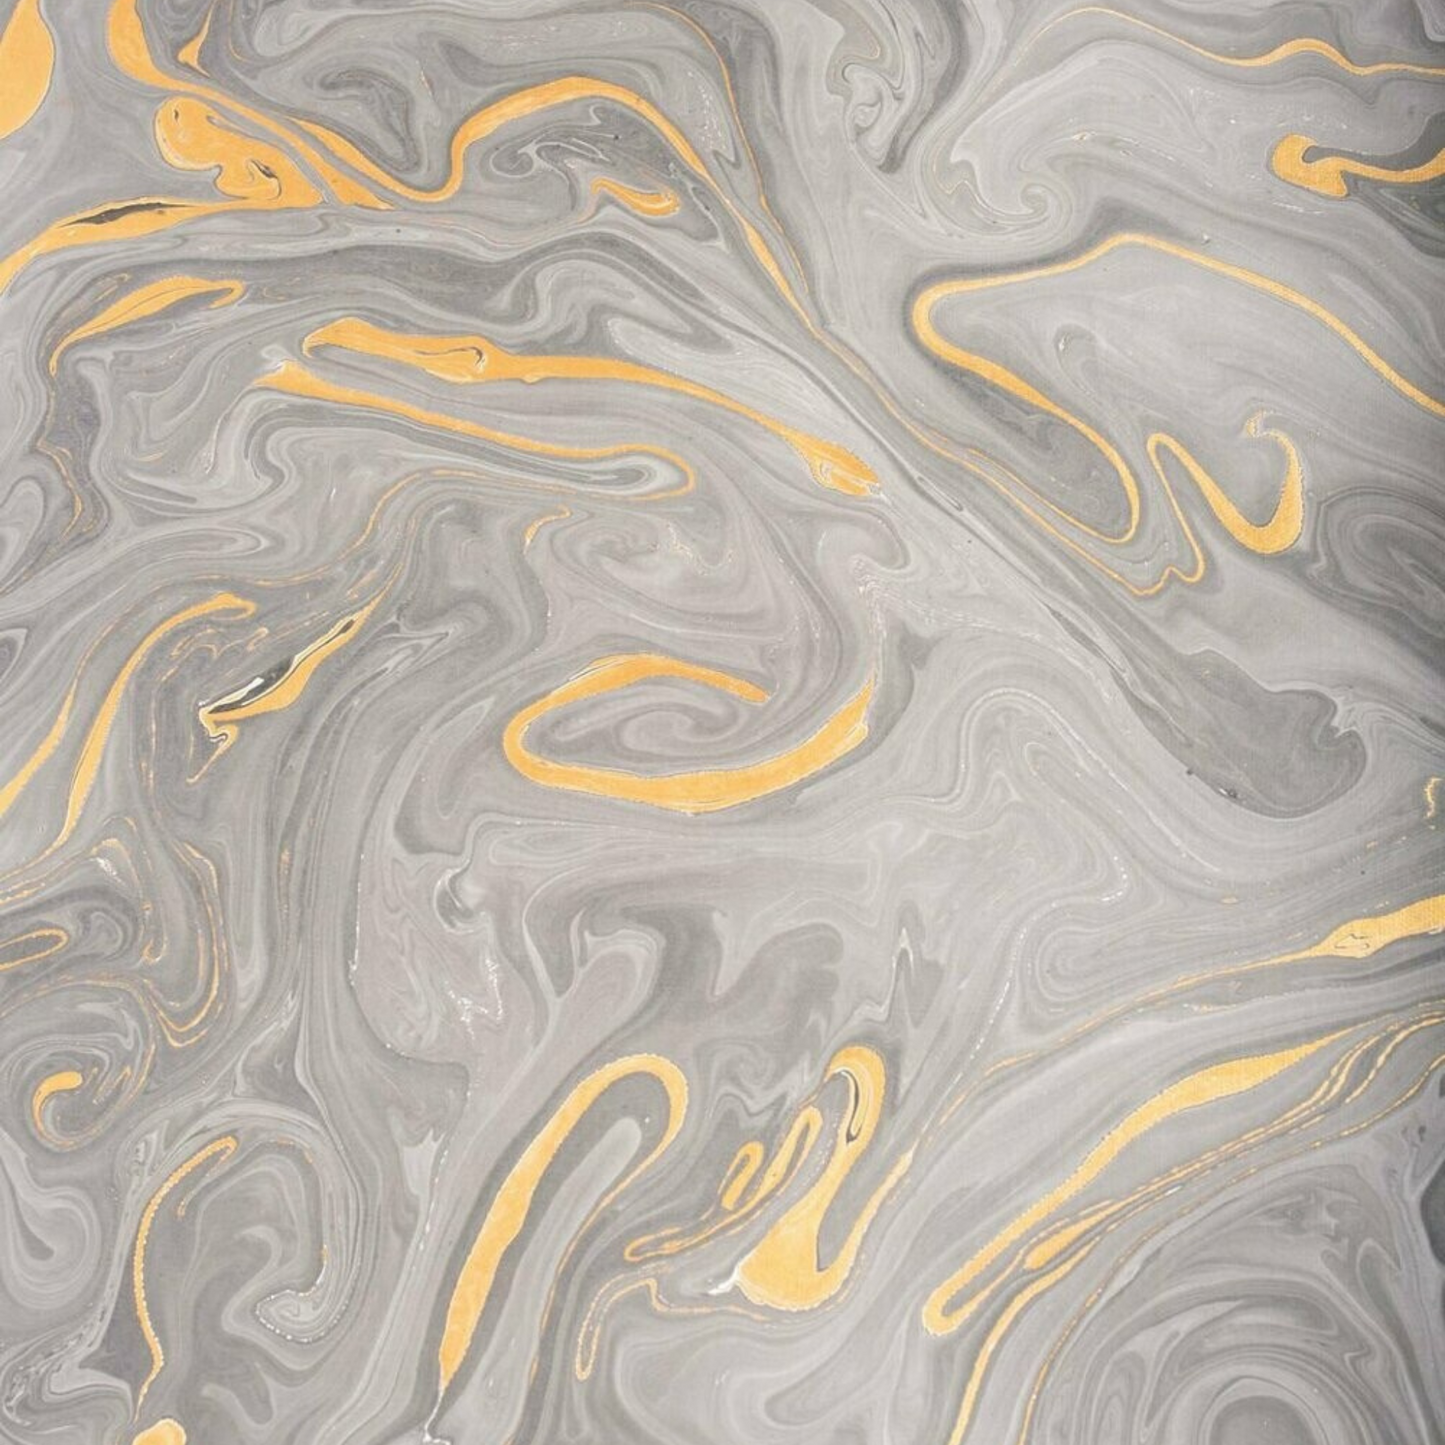 A beautiful and unique hand made marbled gift wrap